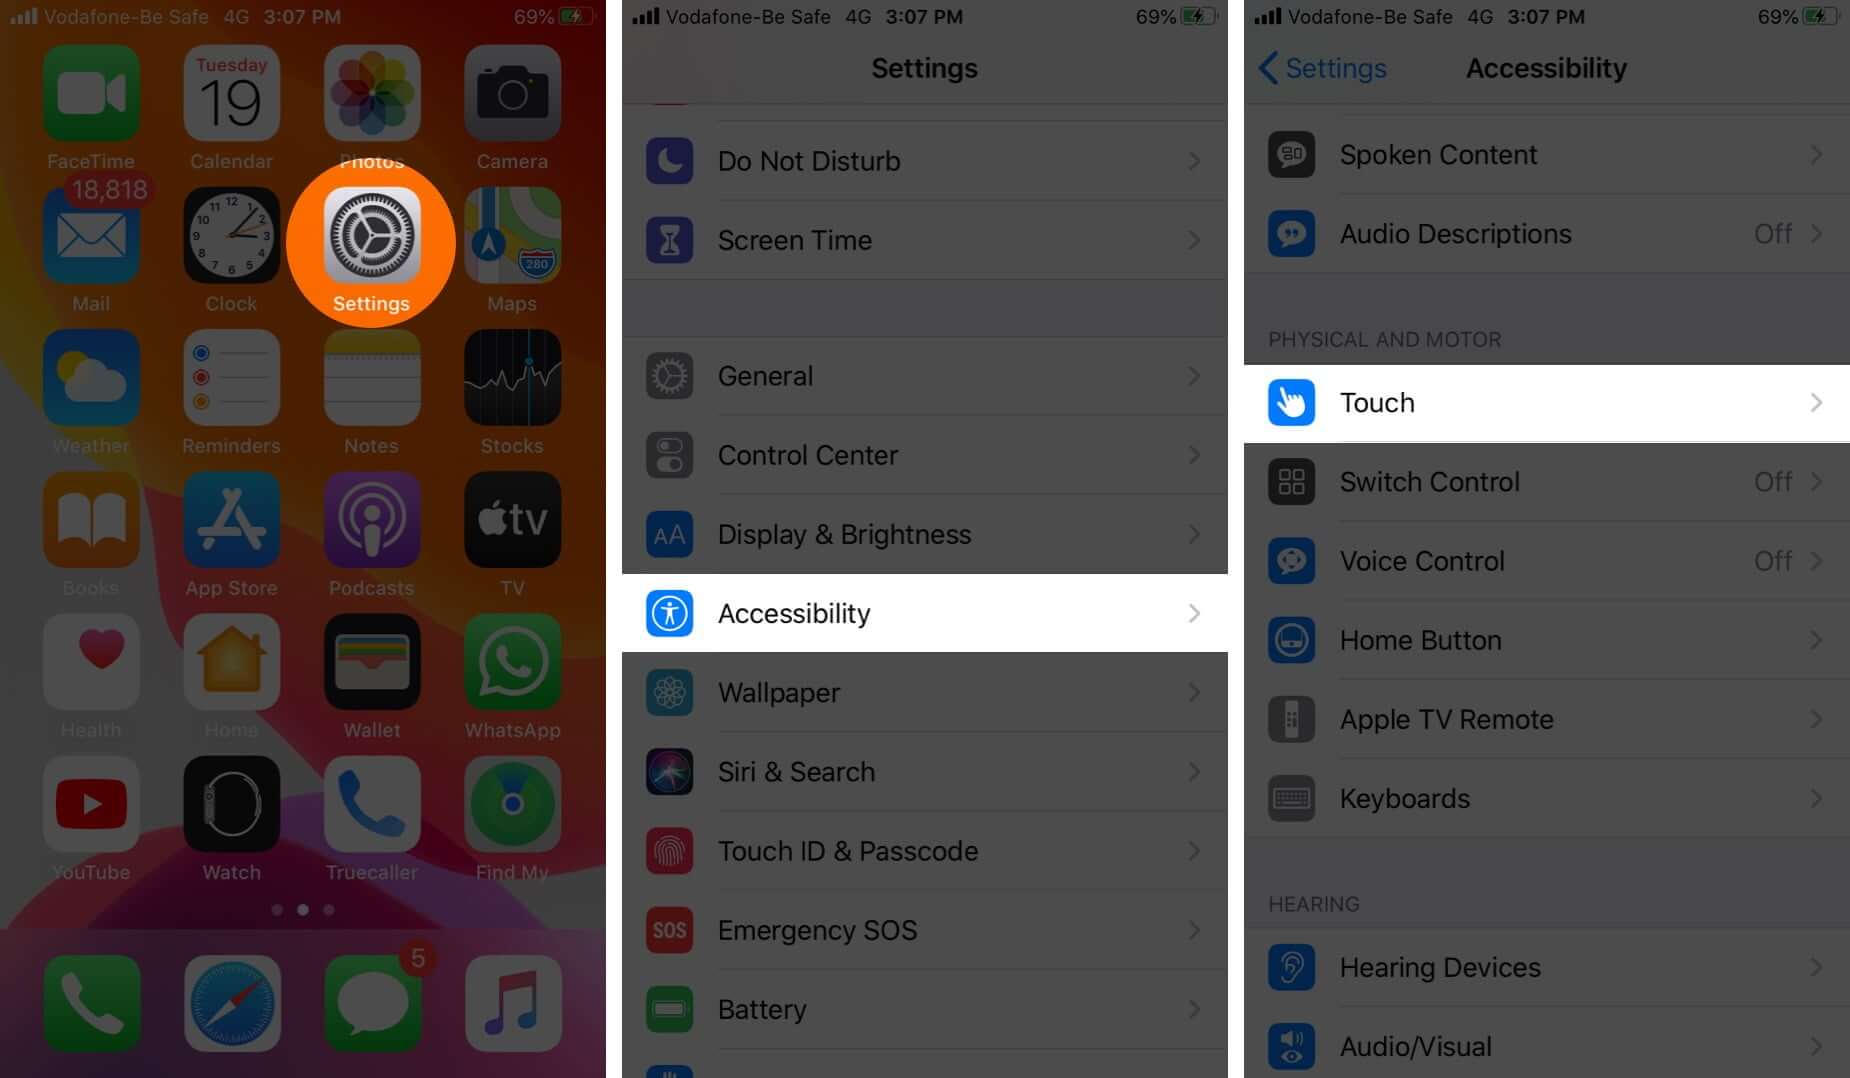 Open Settings Tap on Accessibility and Tap on Touch